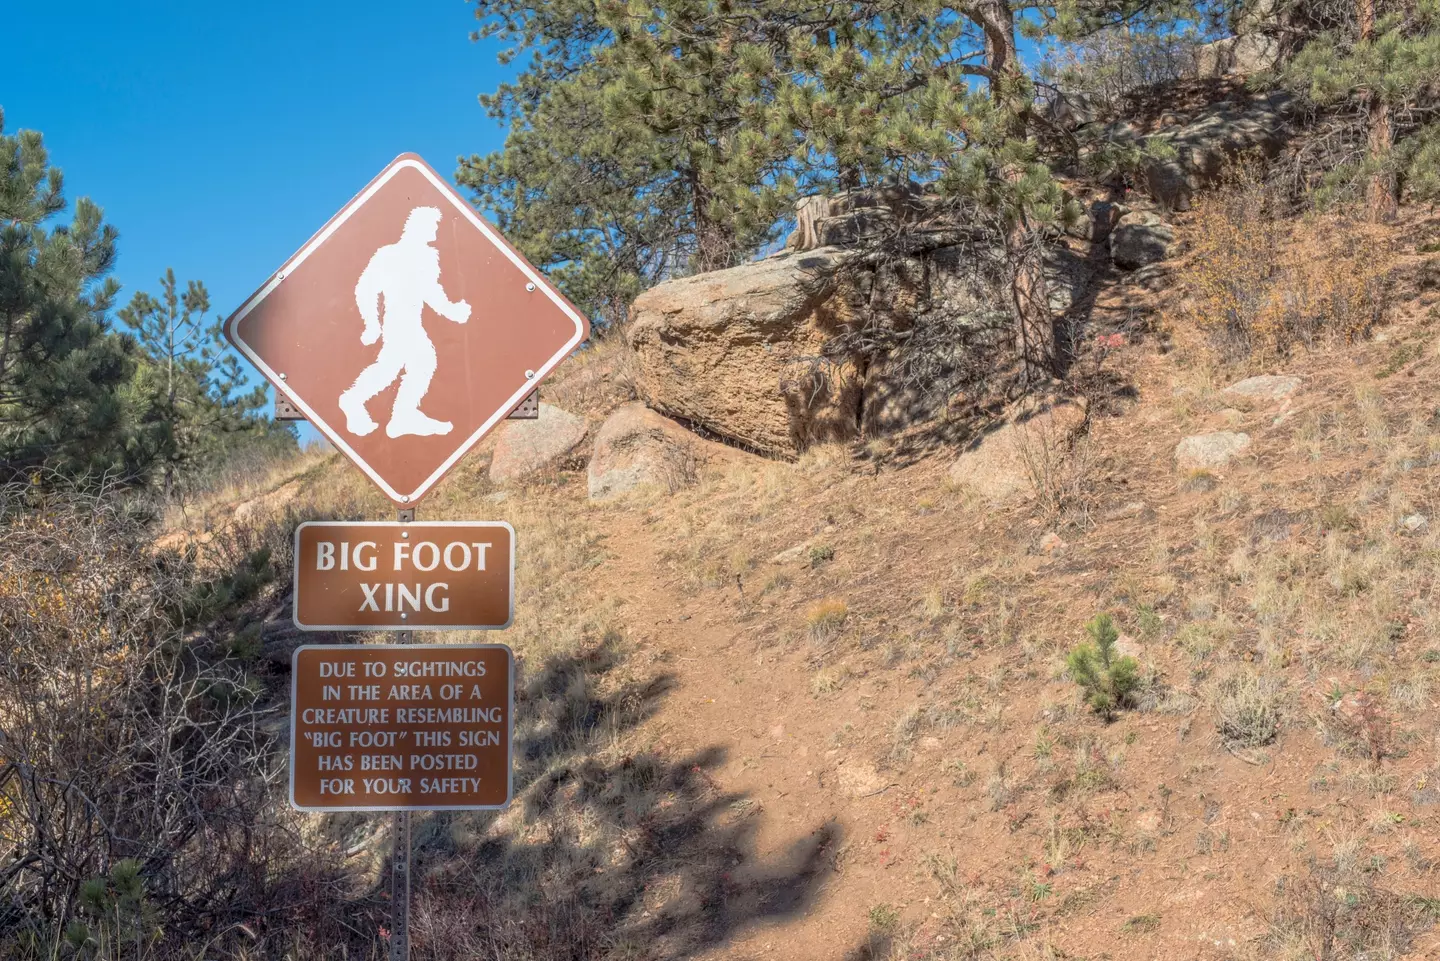 Some parts of the US even have signs to tell you when you're entering an area where Bigfoot has been sighted.